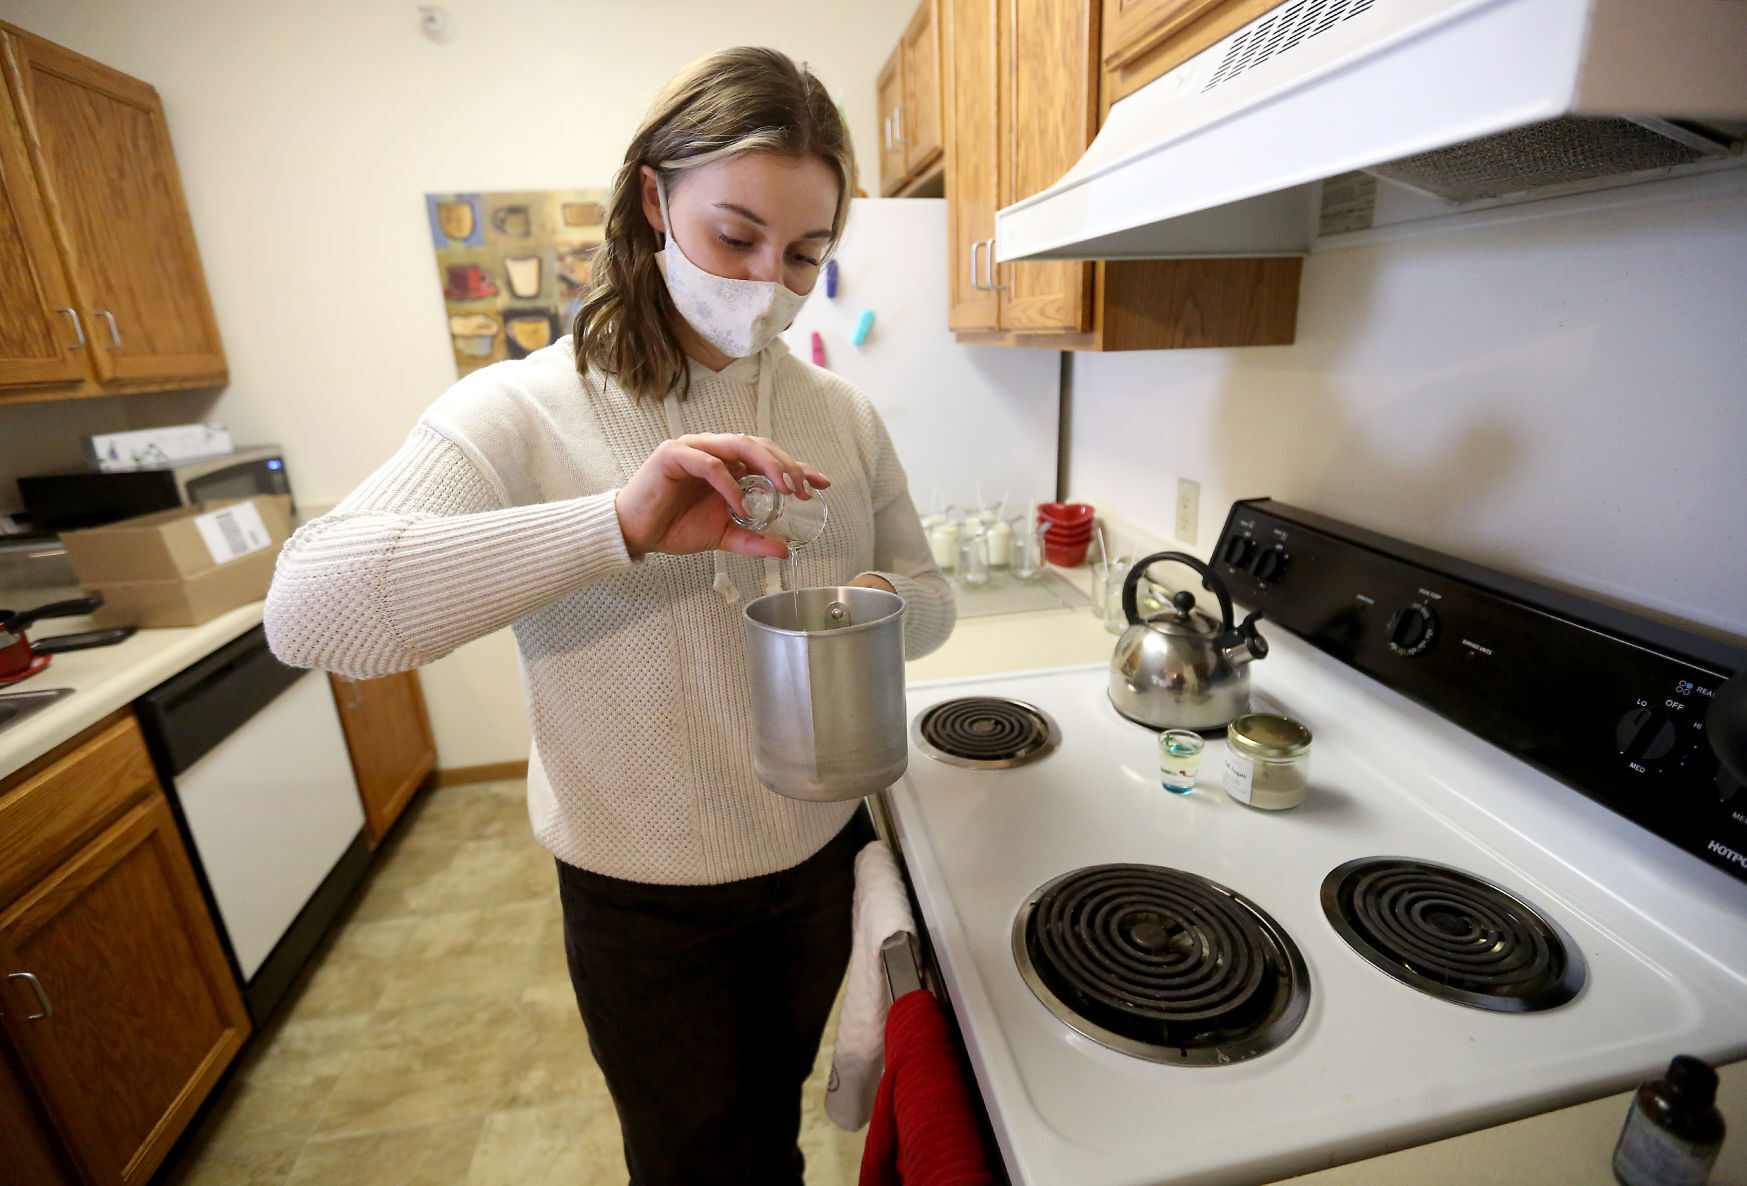 Ali Smith, owner of Ali J. Candles, pours fragrance into a mixture while making candles at her apartment in Platteville, Wis., on Wednesday, Dec. 30, 2020. PHOTO CREDIT: JESSICA REILLY